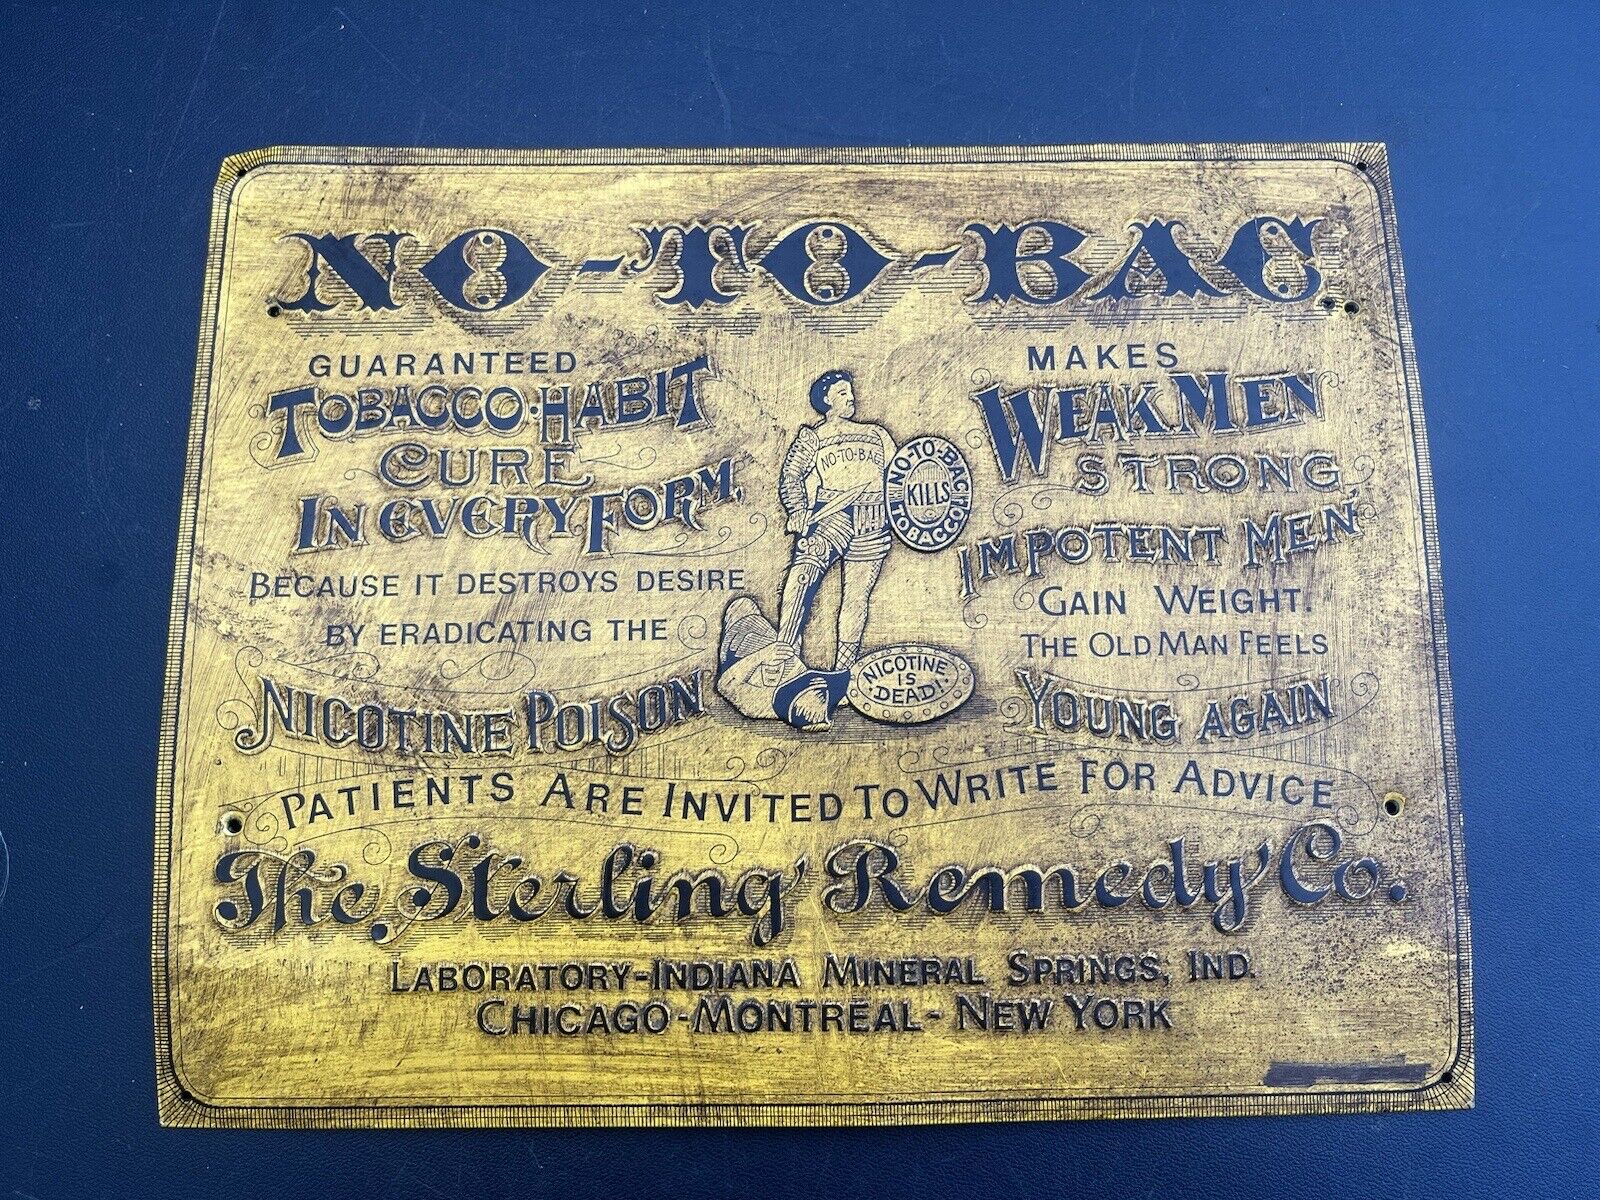 No-To-Bac The Sterling Remedy Co Embossed Tin Tobacco Sign AAA Sign Co OH